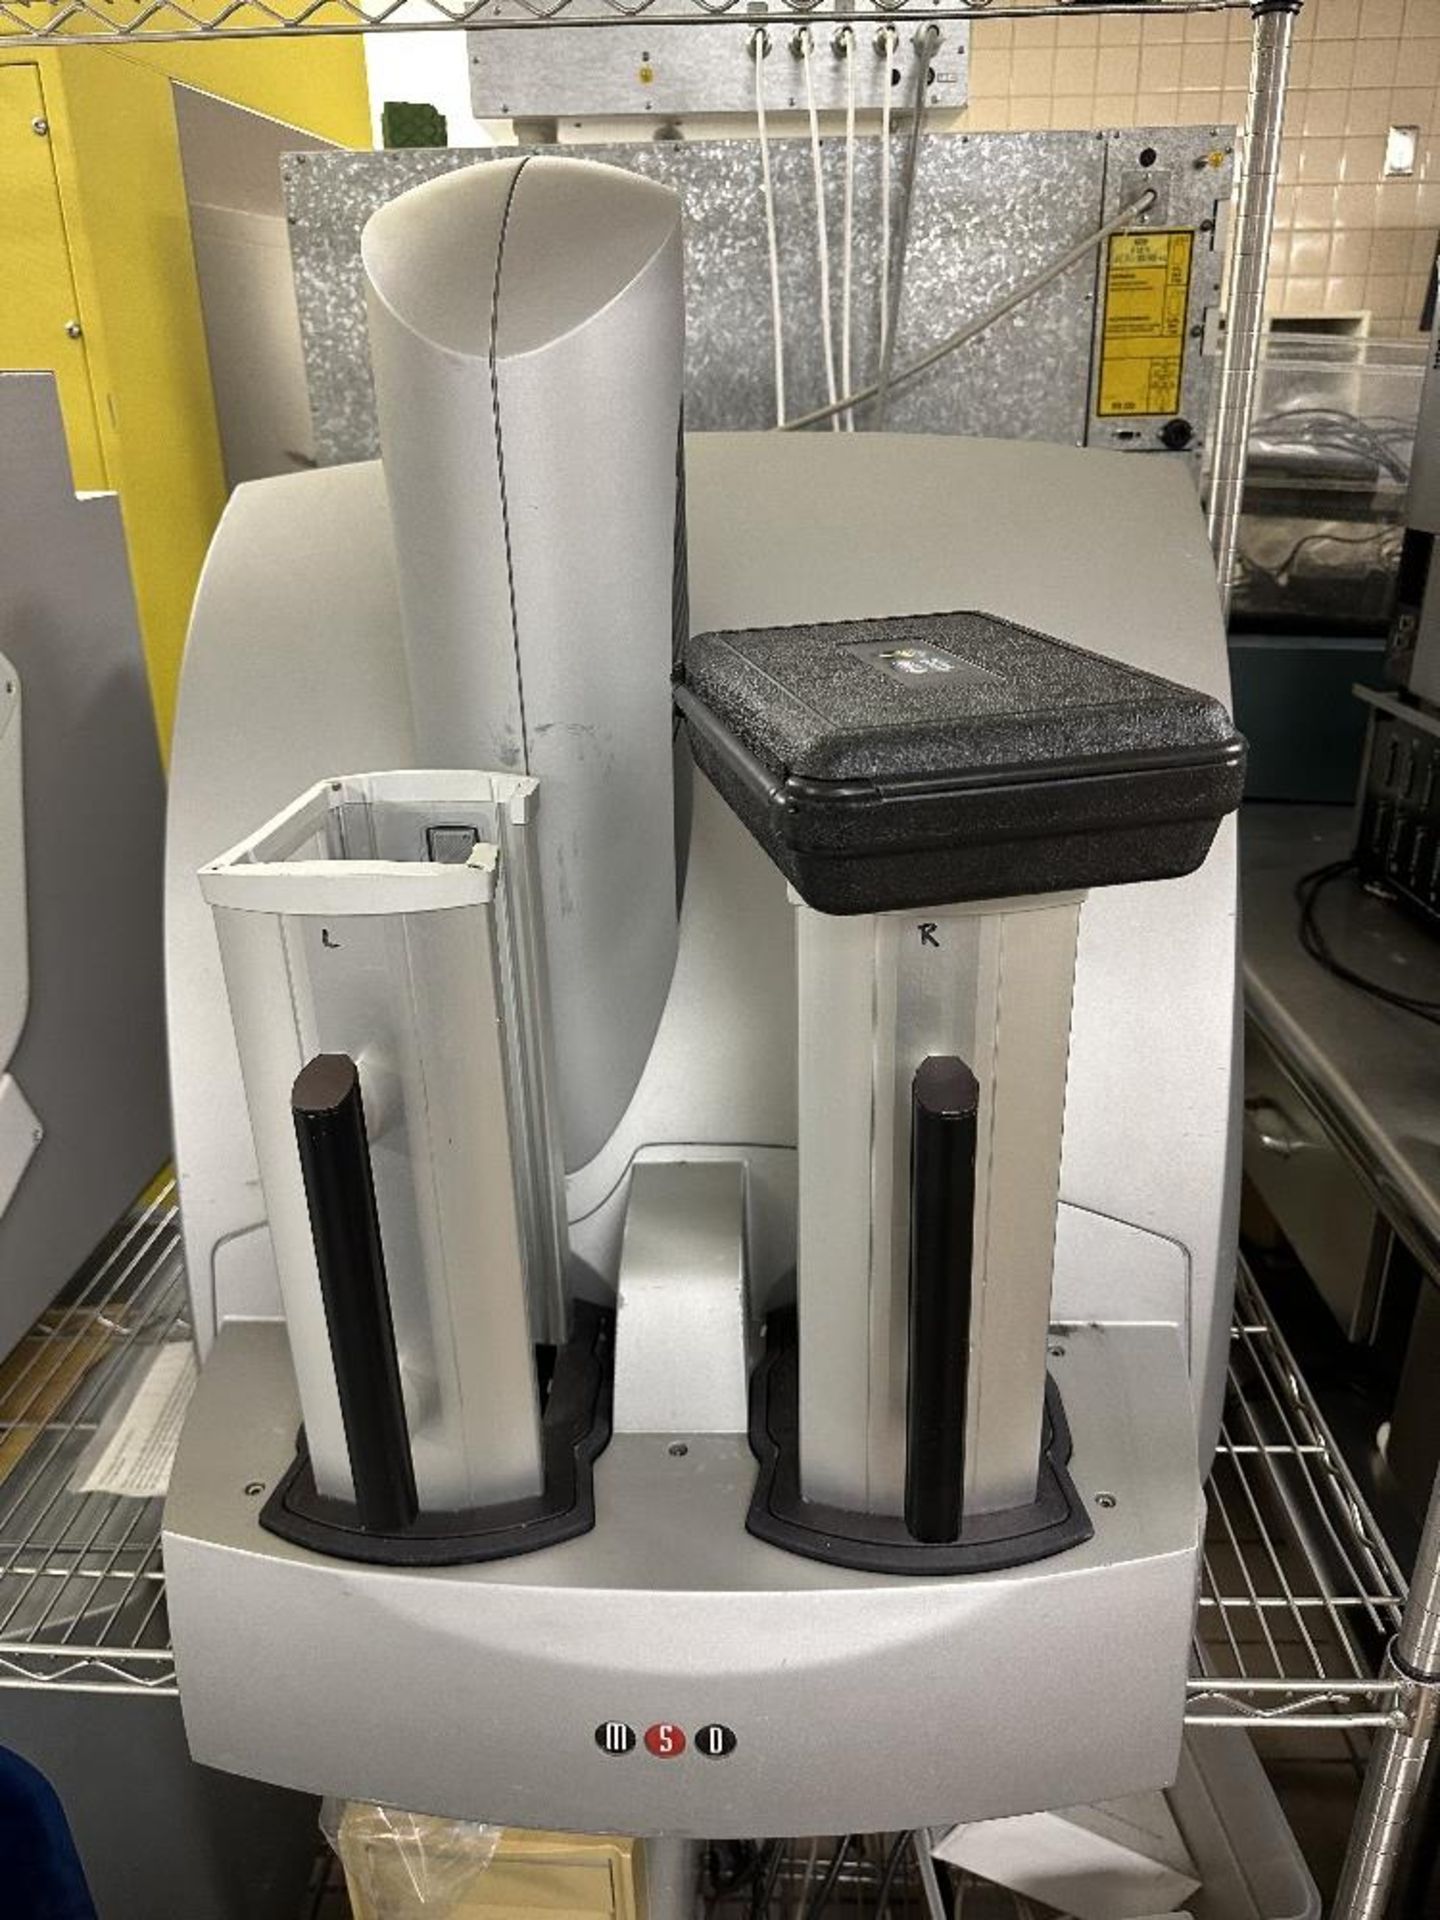 Meso Scale Discovery MSD 1200 Sector Imager (LOCATED IN MIDDLETOWN, N.Y.)-FOR PACKAGING & SHIPPING